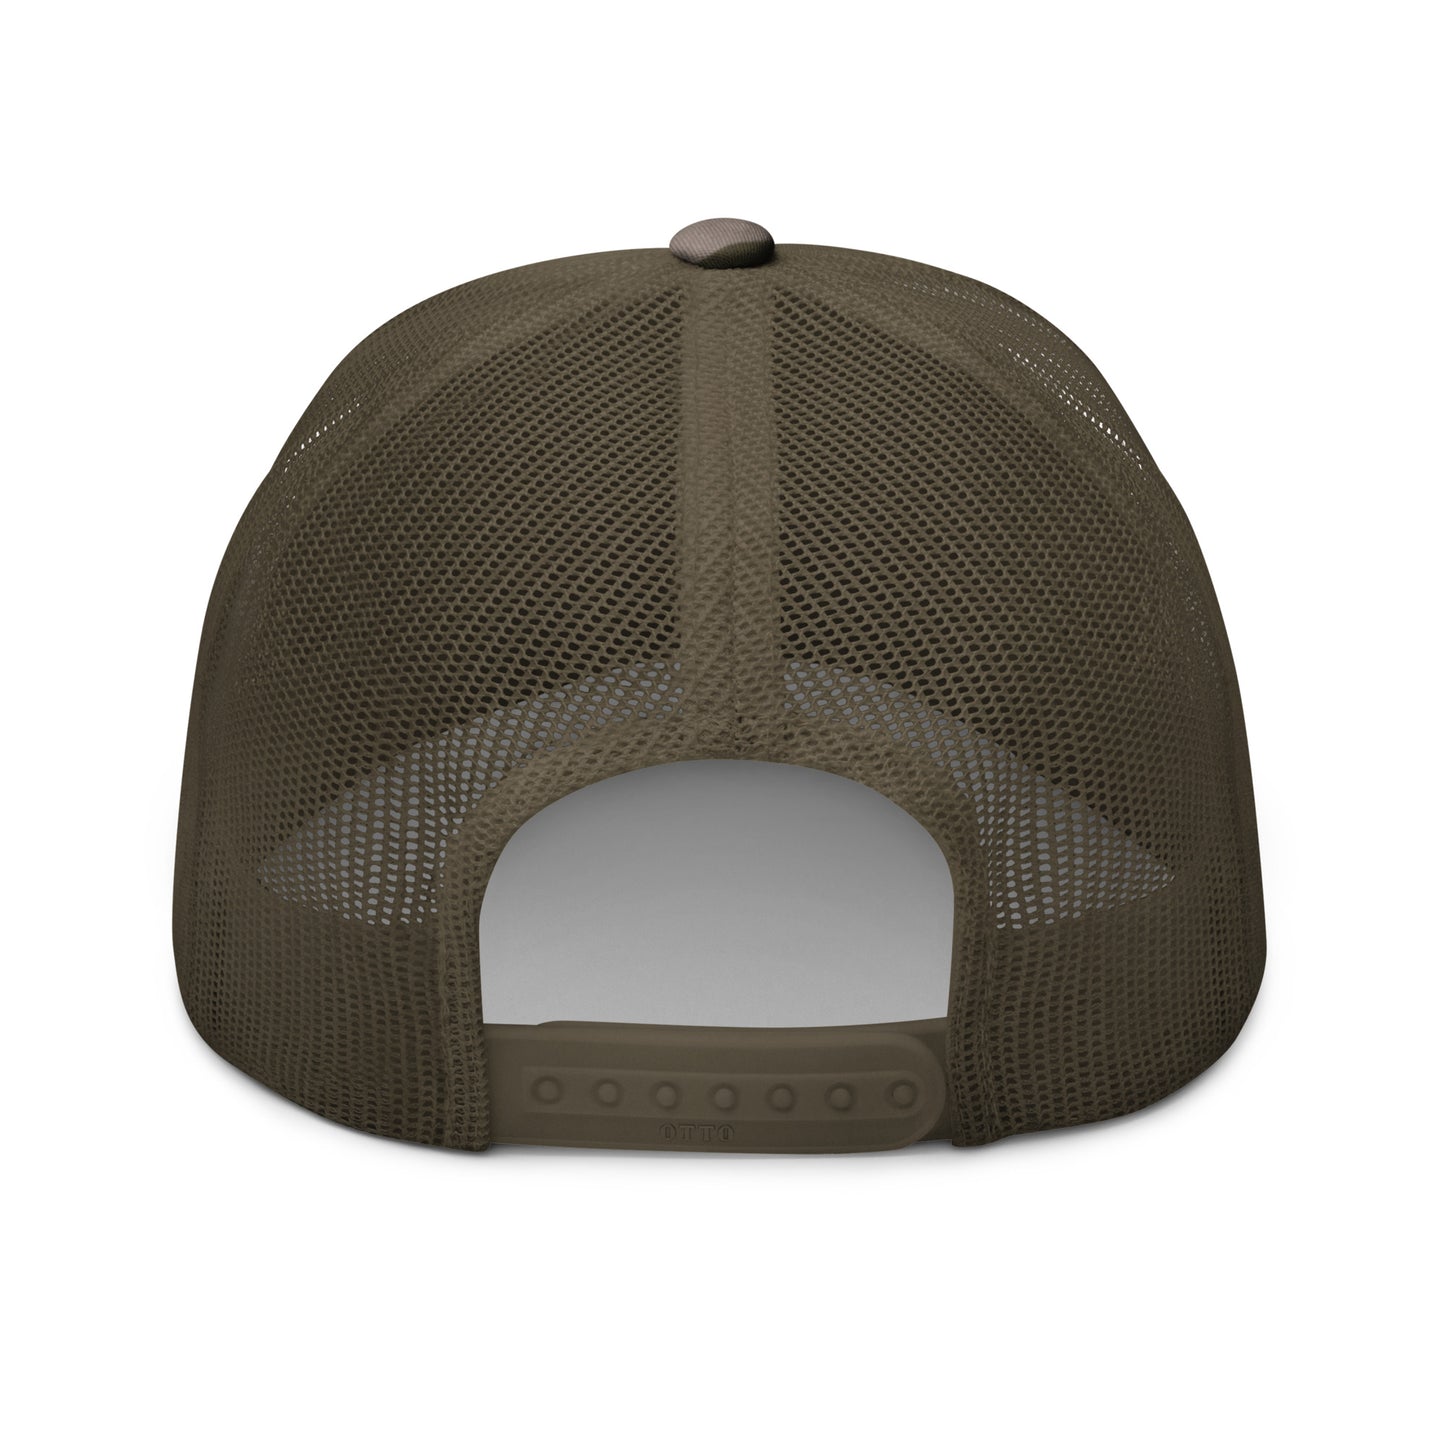 A&R 15 America’s Rifle Camouflage trucker hat